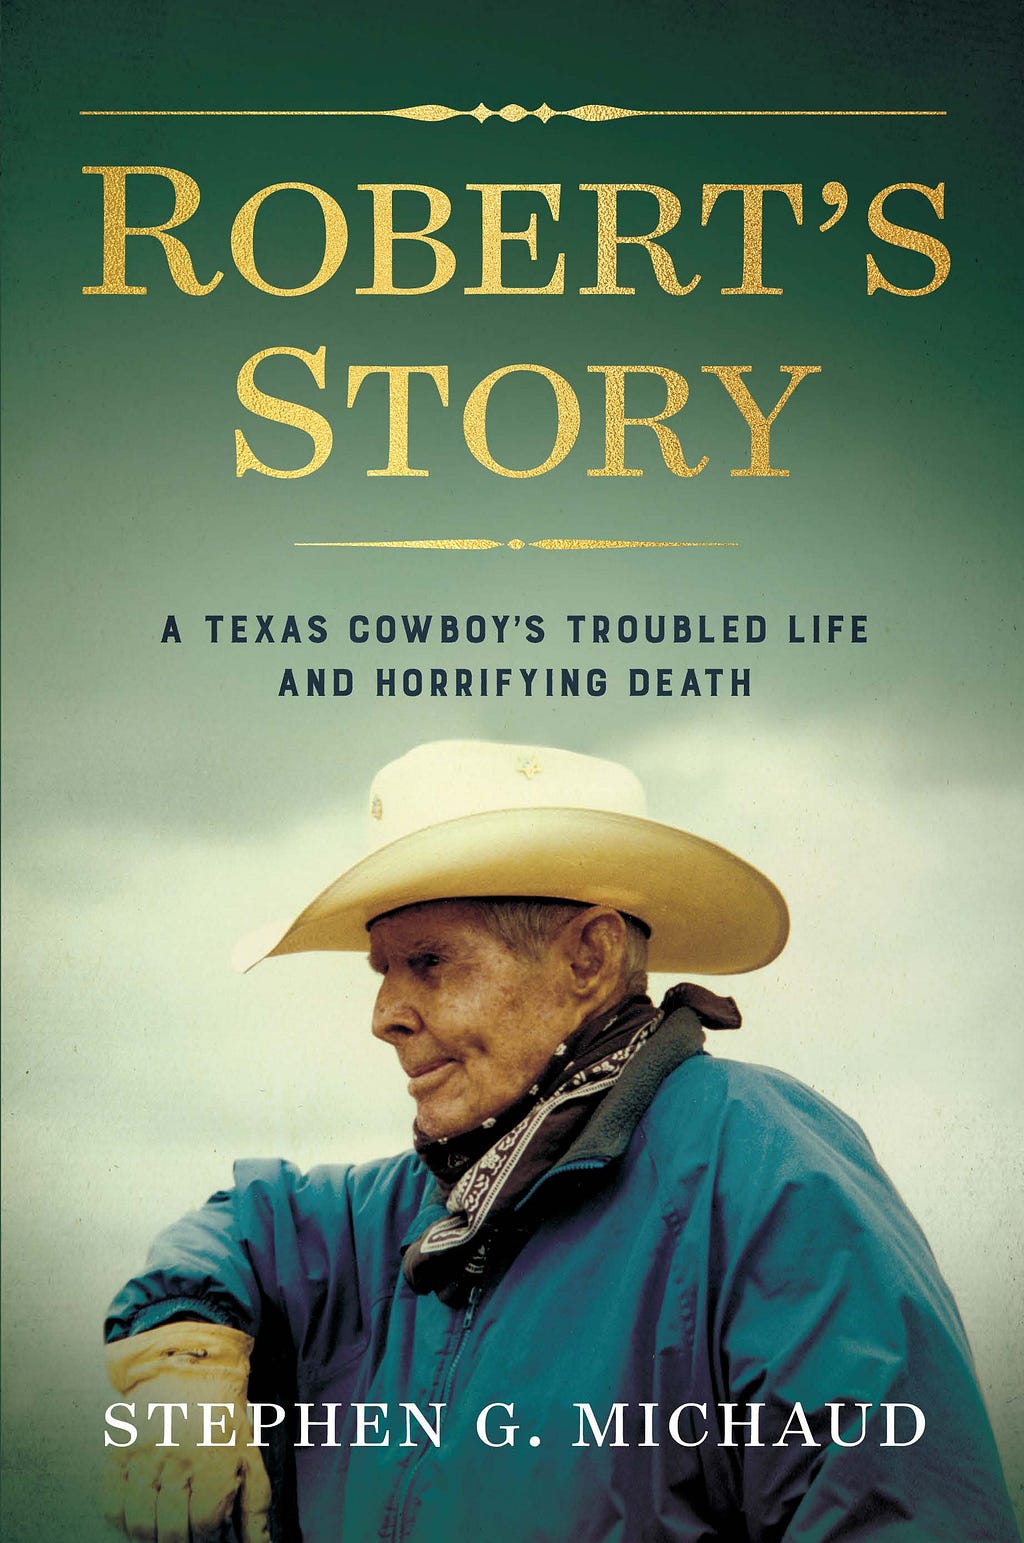 Robert's Story: A Texas Cowboy's Troubled Life and Horrifying Death PDF